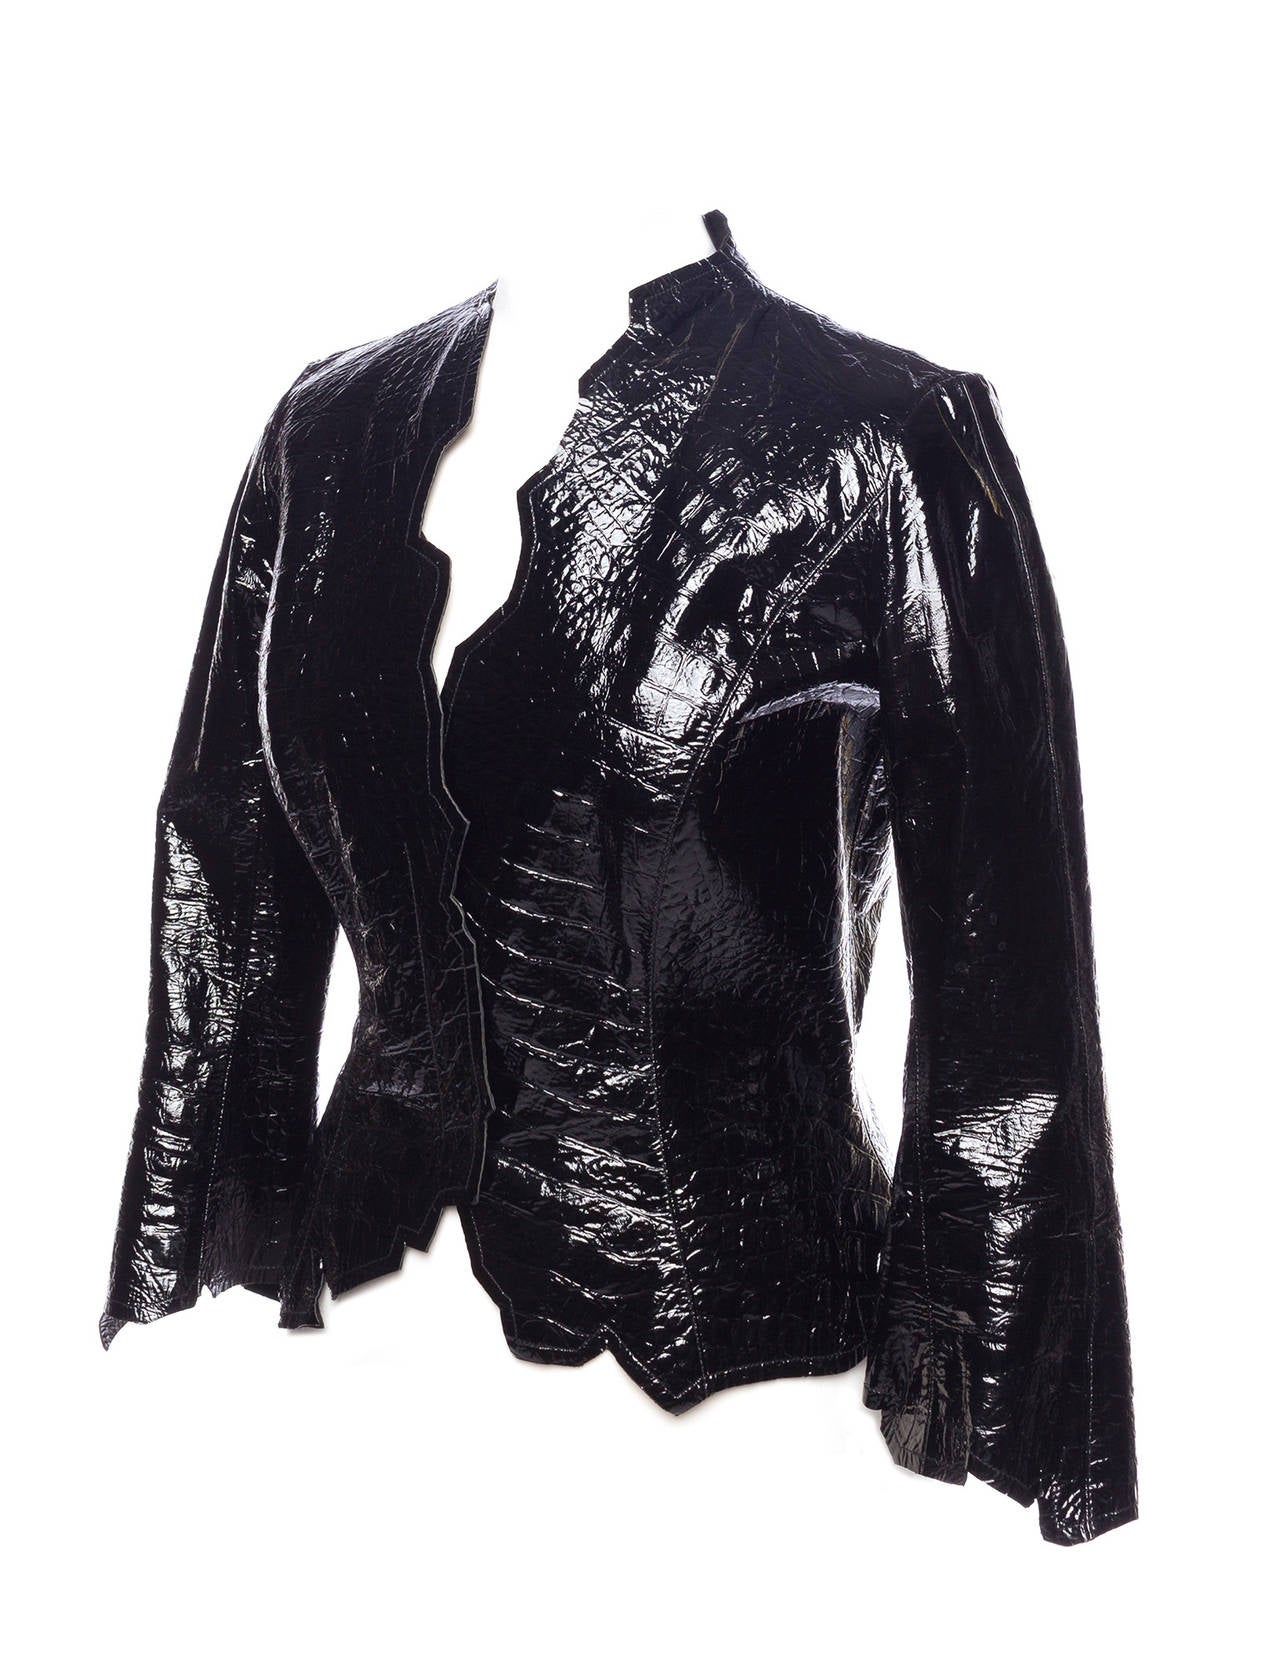 Mugler by Thierry Mugler coated leather embossed leather jacket 1990's. Jacket has raw edged details, and is made from a shiny coated leather with 3 snap details, 3/4 sleeveless. This item is coming from the first secondary line from the House of